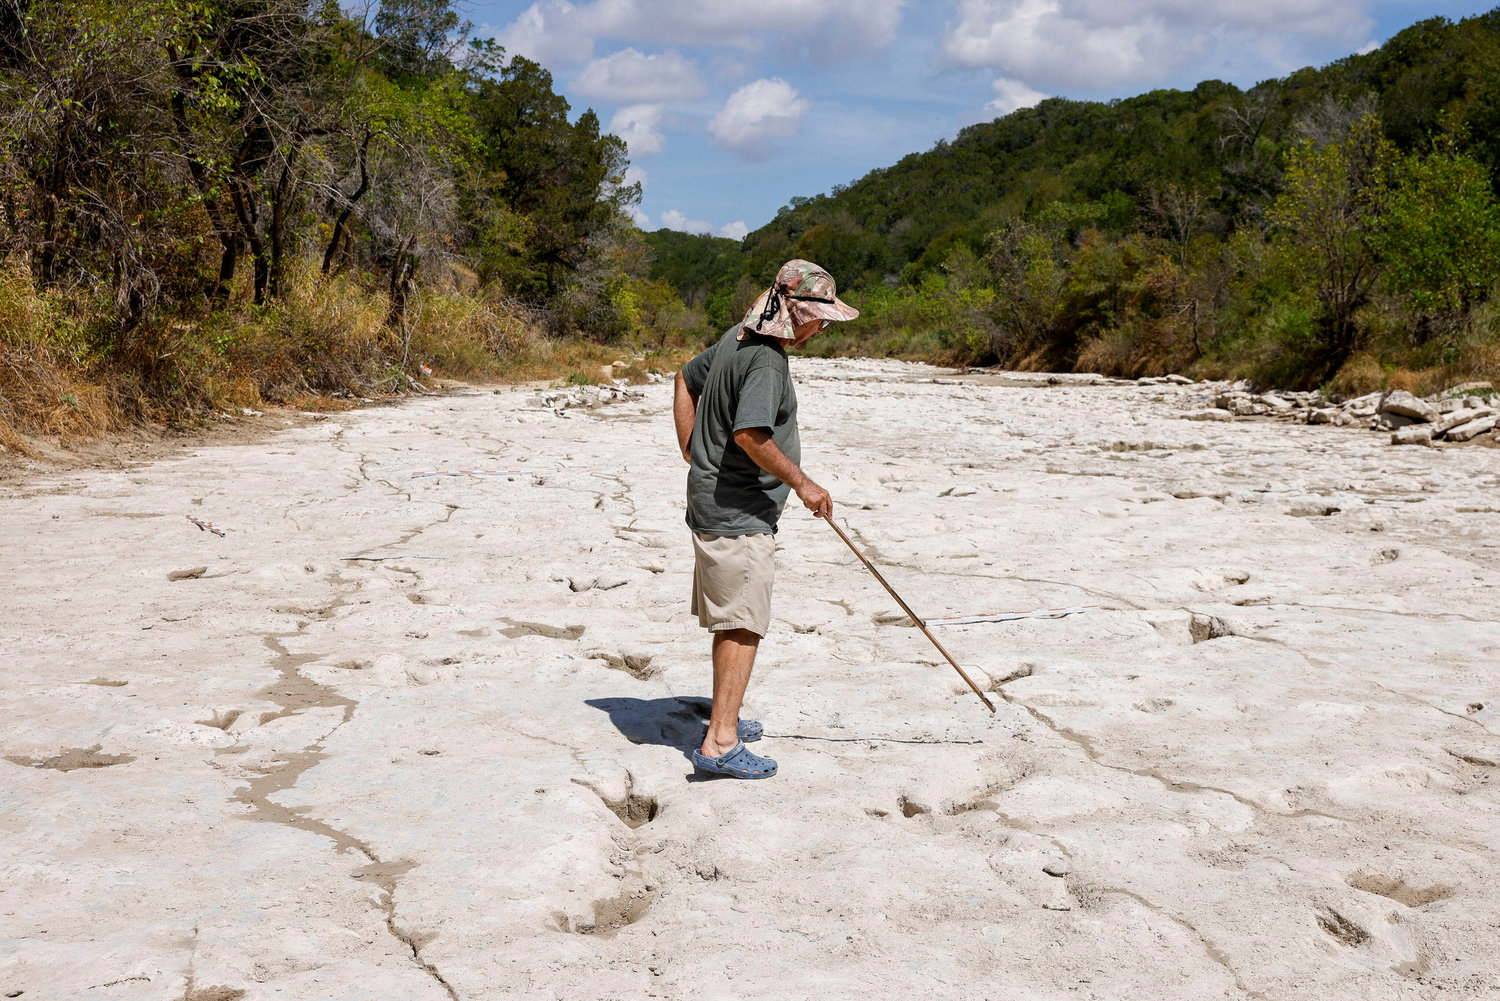 Dinosaur track researcher Glen Kuban points out various dinosaur tracks in the Paluxy River at Dinosaur Valley State Park in Glen Rose, Texas, Friday, Aug. 19, 2022. The recent drought lowered the level of the river and exposed dozens of tracks that were previously underwater. (Elías Valverde II/The Dallas Morning News/TNS)